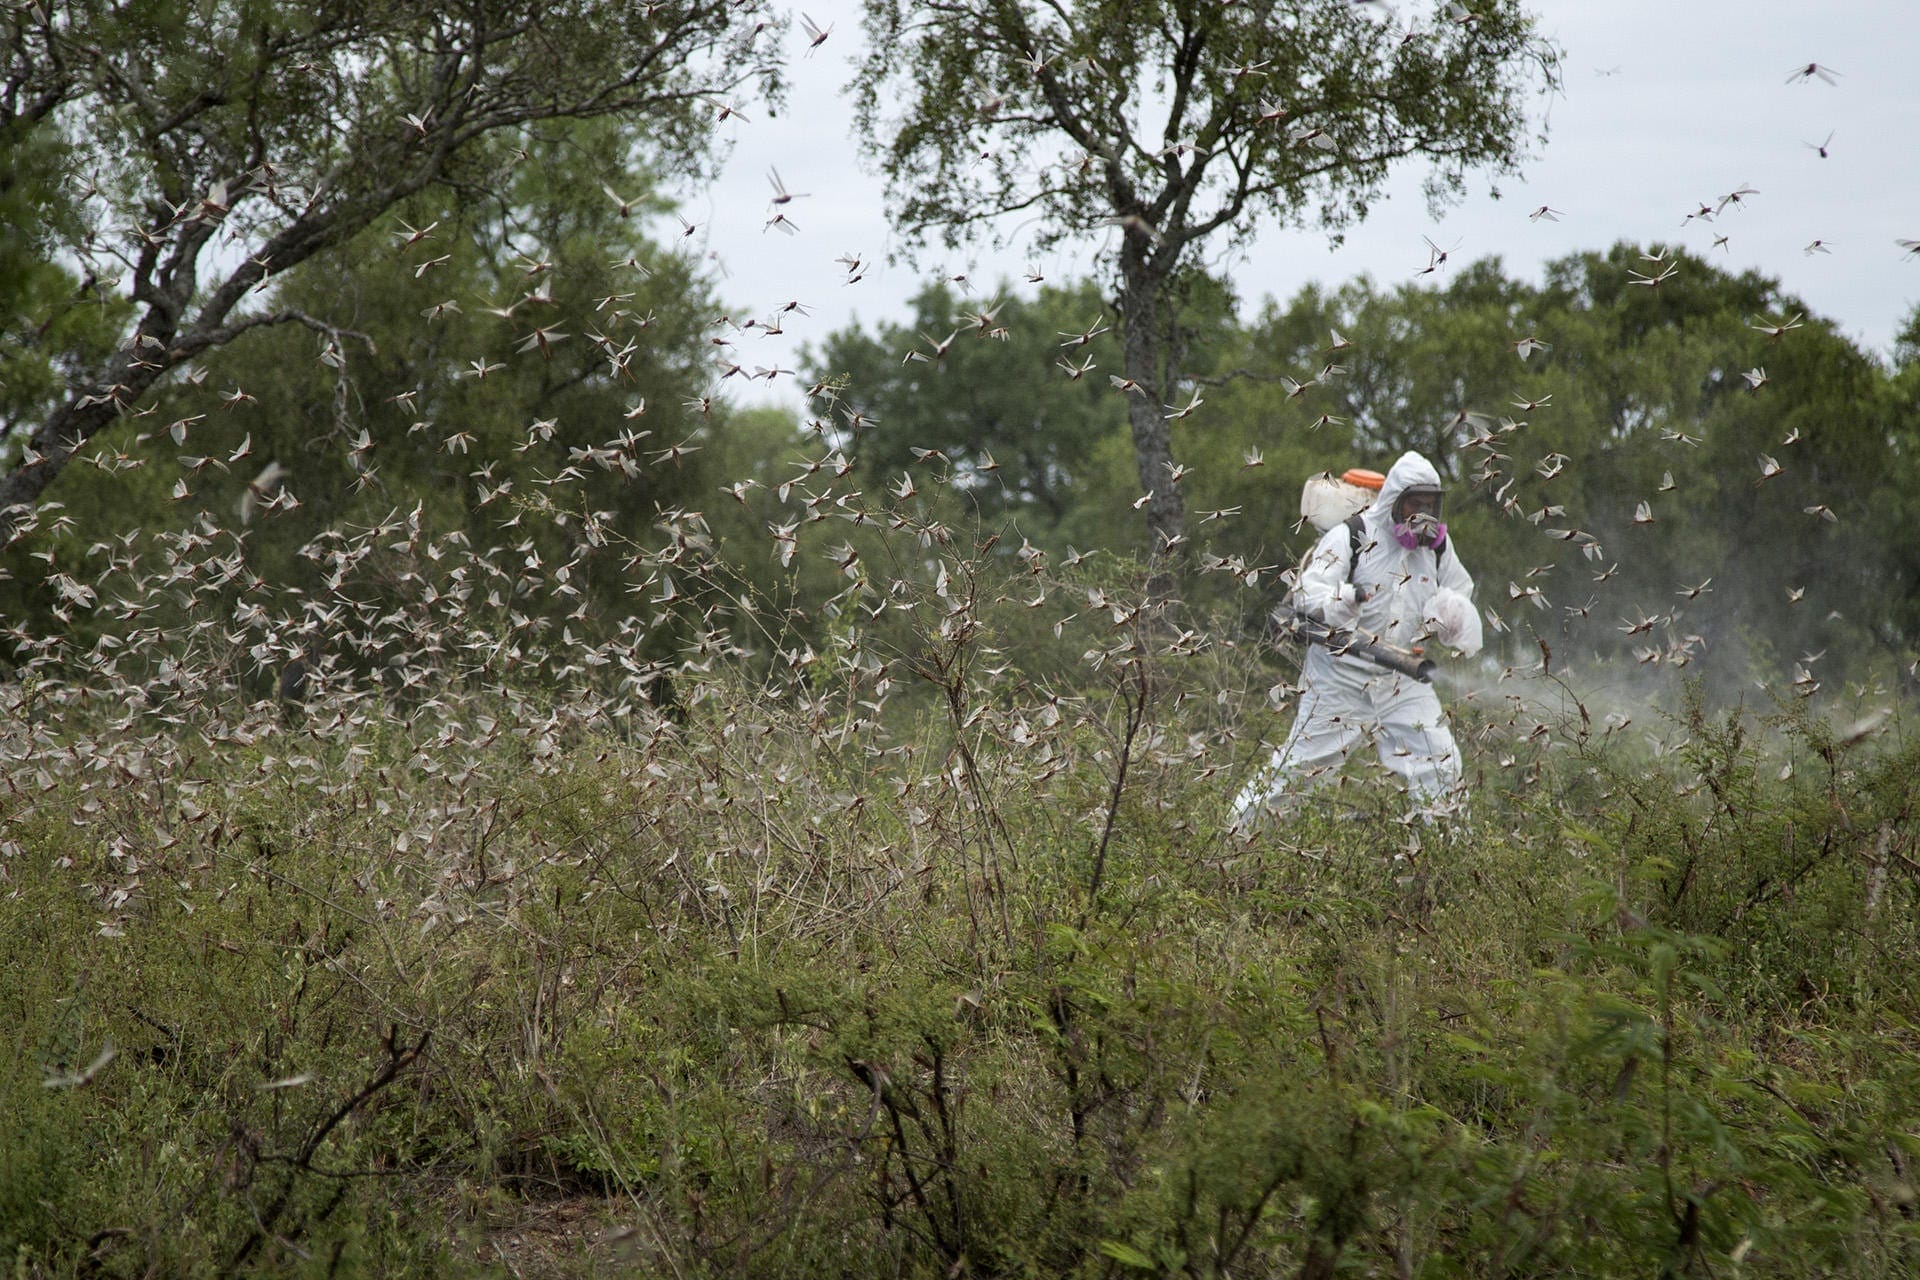 A worker tries to fumigate locusts in northern Argentina. Once they are adults who can fly, the locusts are much harder to control. (Courtesy Sebastián Lorenzo Pisarello | Senasa)